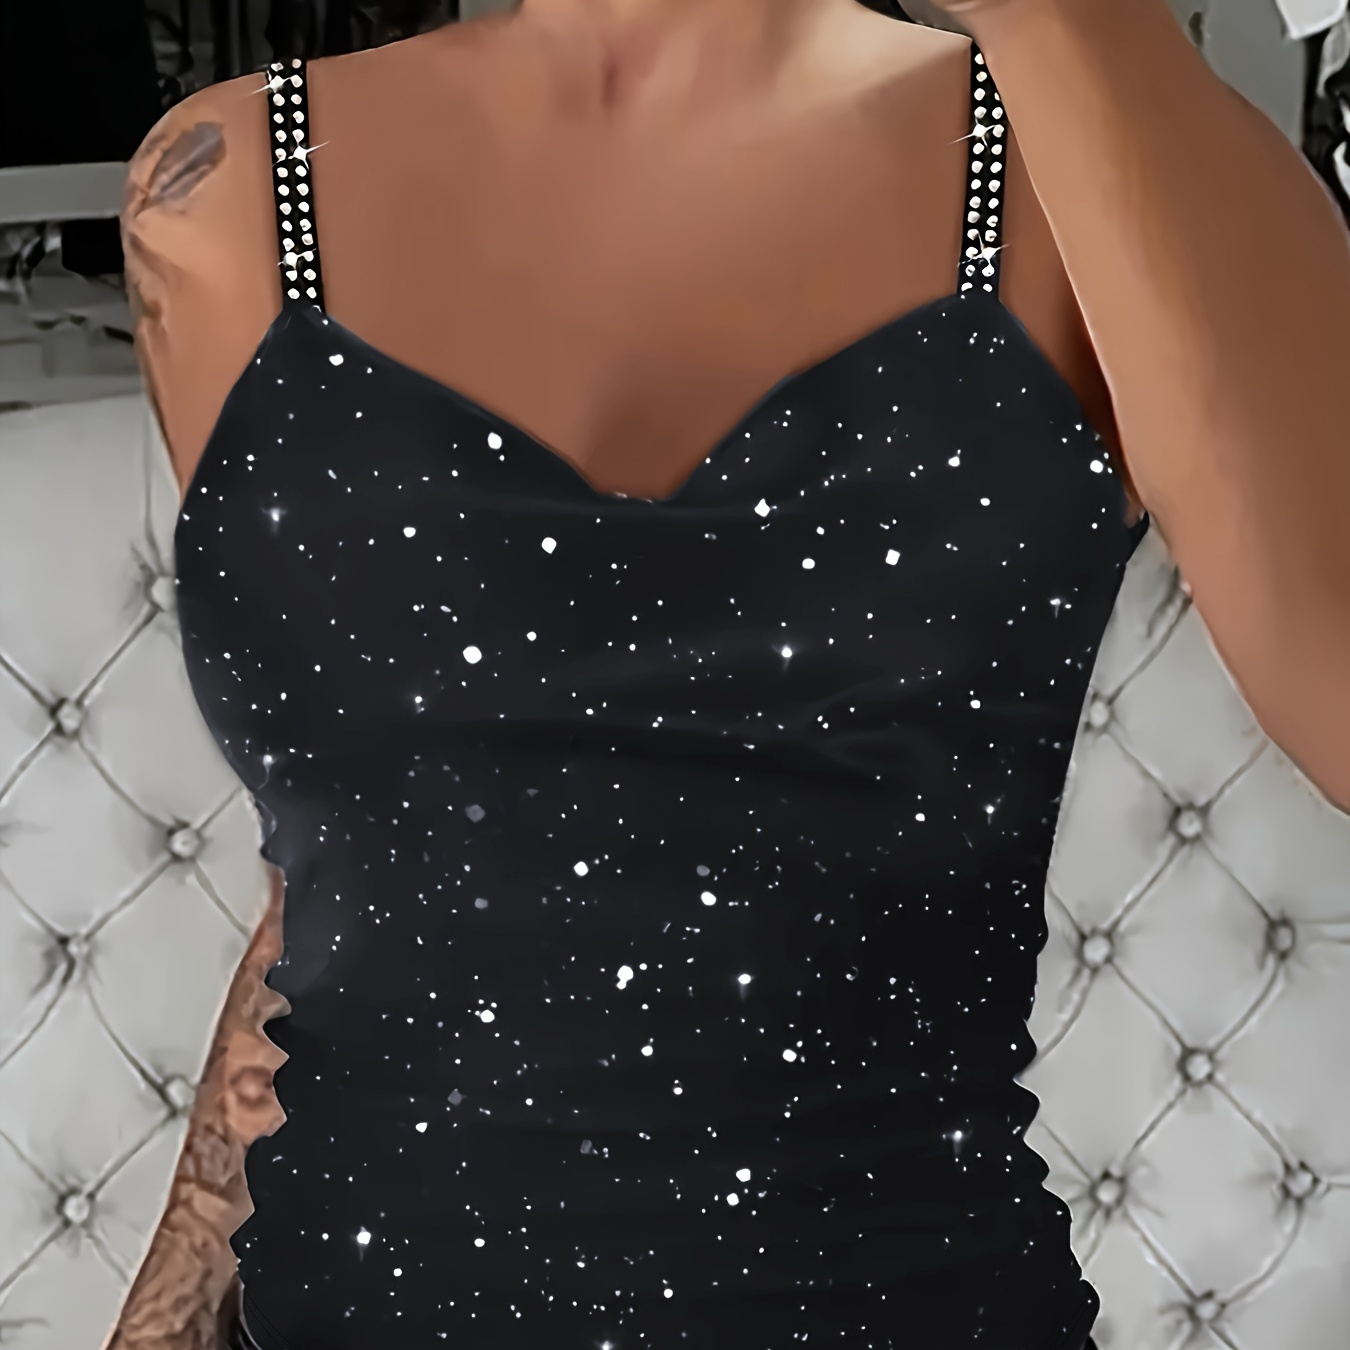 

Galaxy Print Spaghetti Strap Tank Top, Casual Rhinestone Sleeveless Knitted Cami Top For Summer, Women's Clothing